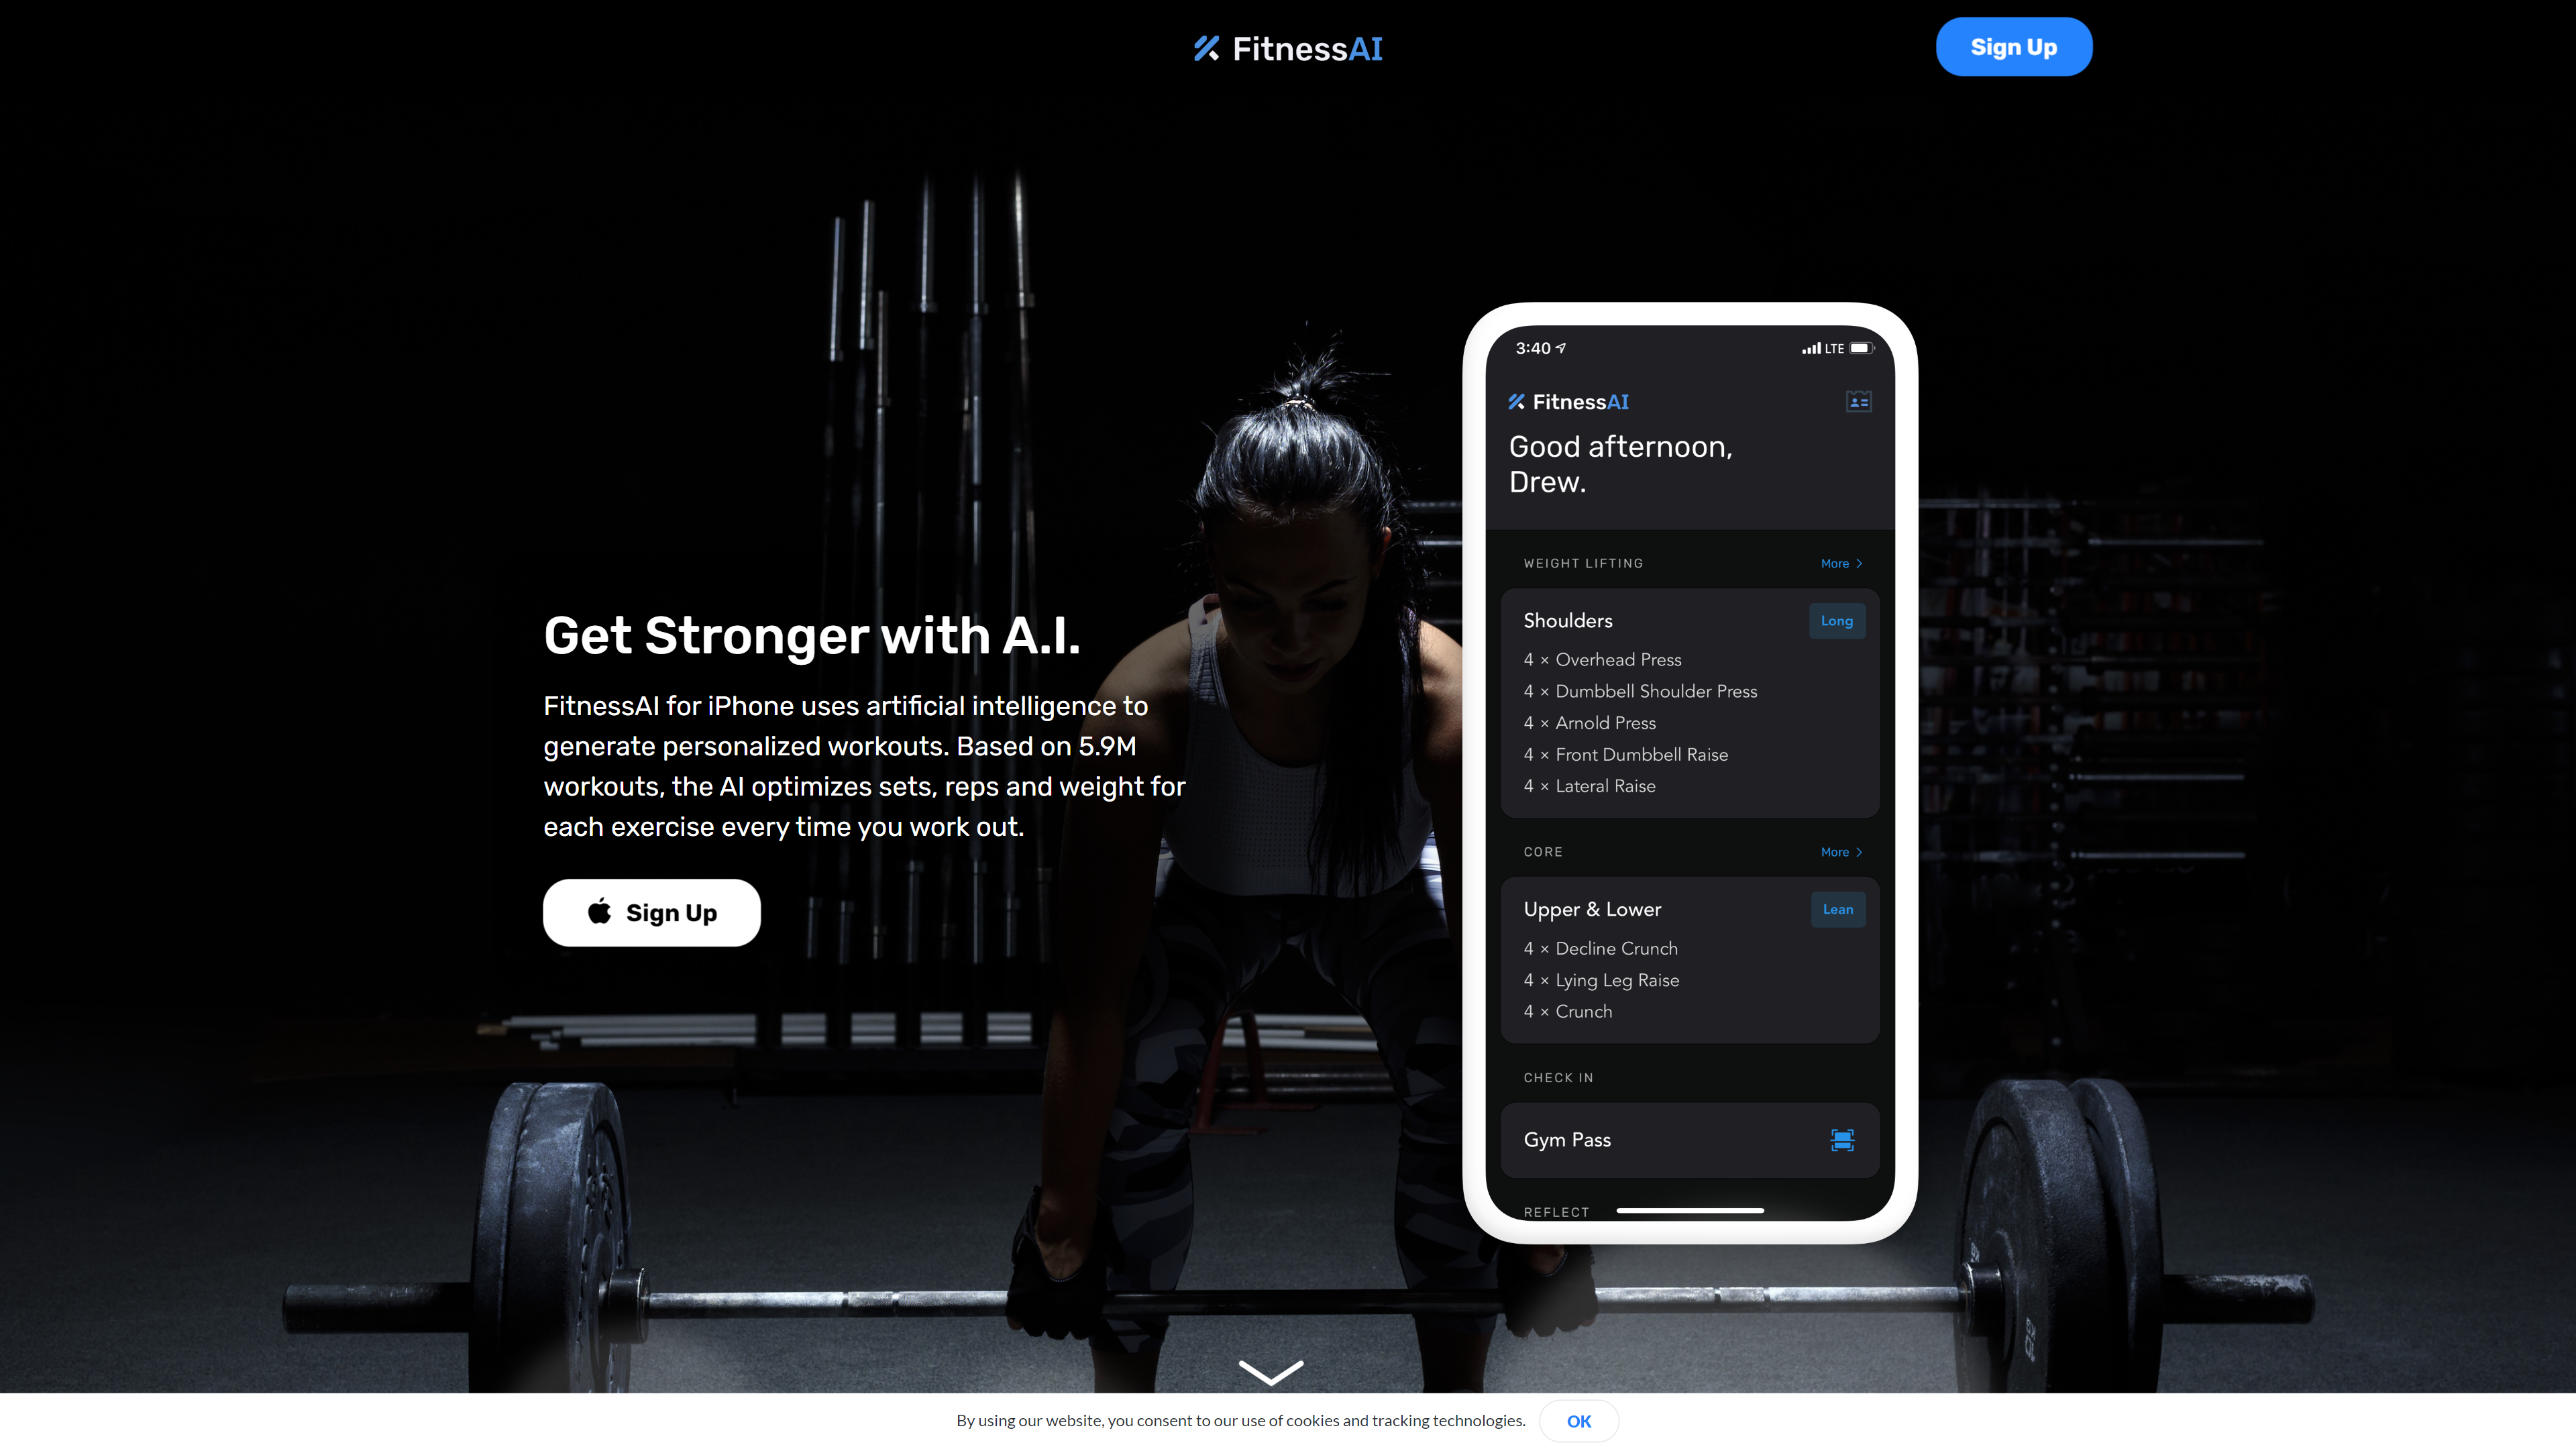 Personalized Workouts Tailored by Data